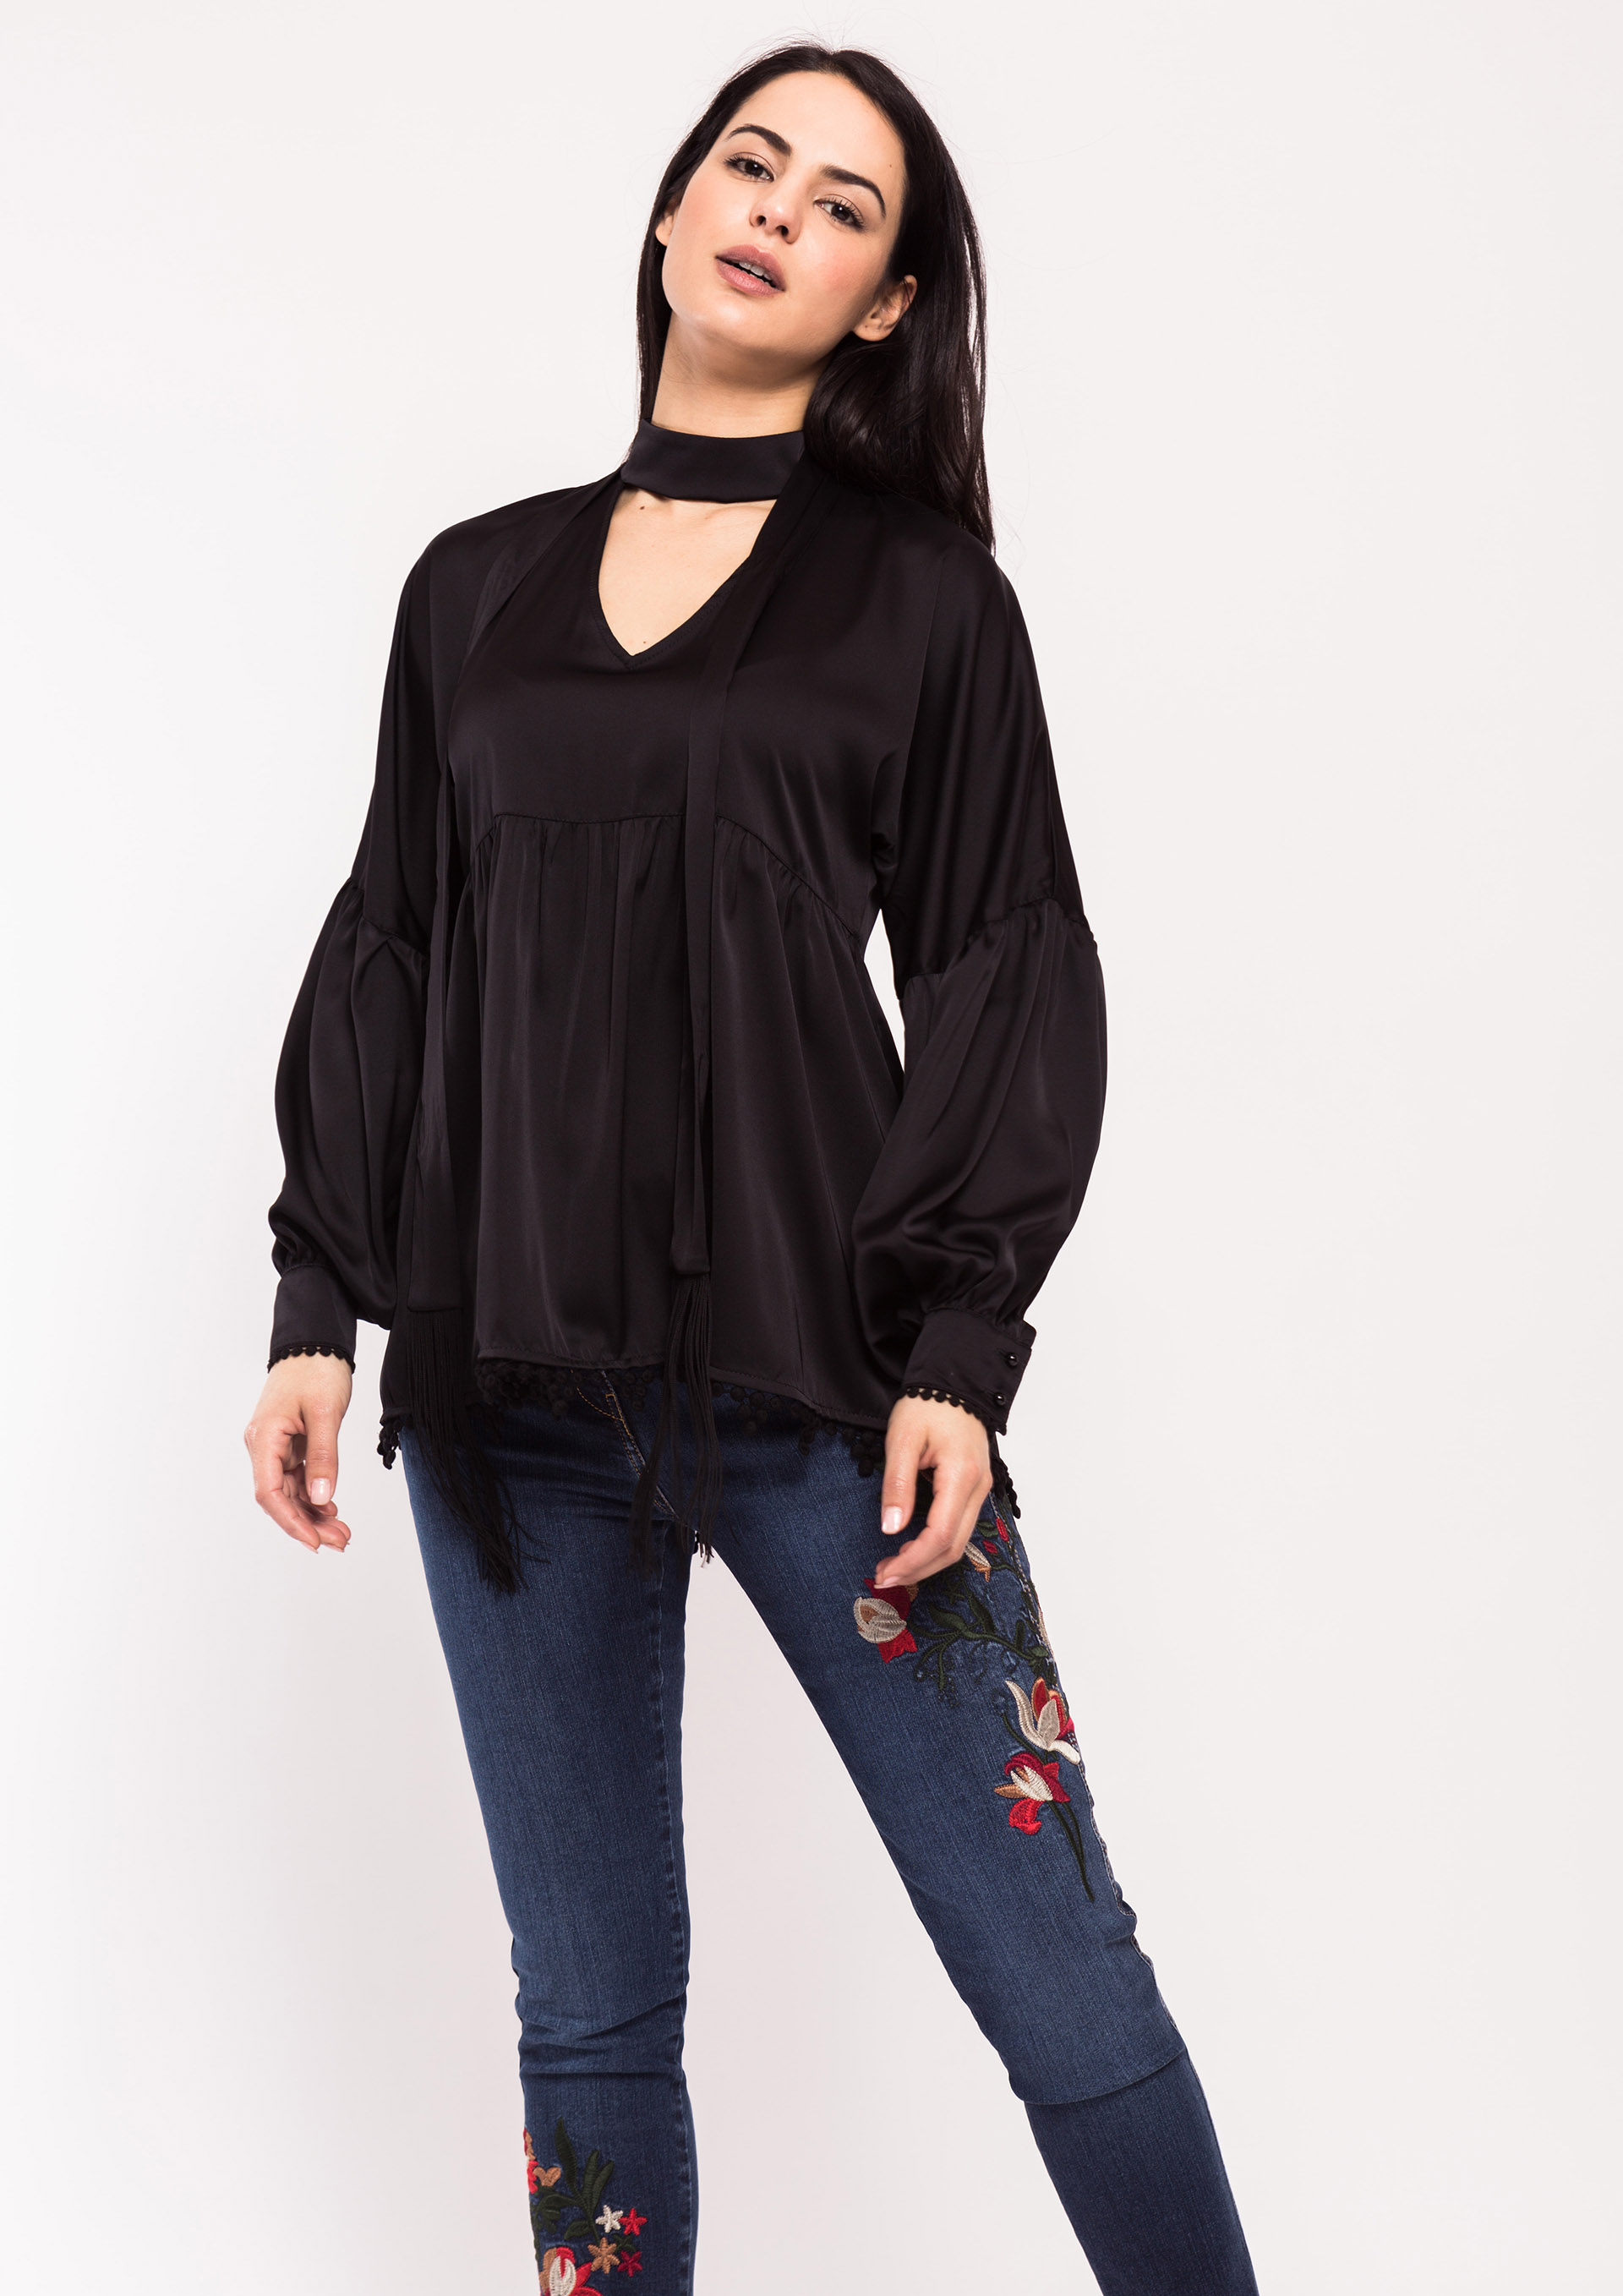 Black fluid blouse with neck bow